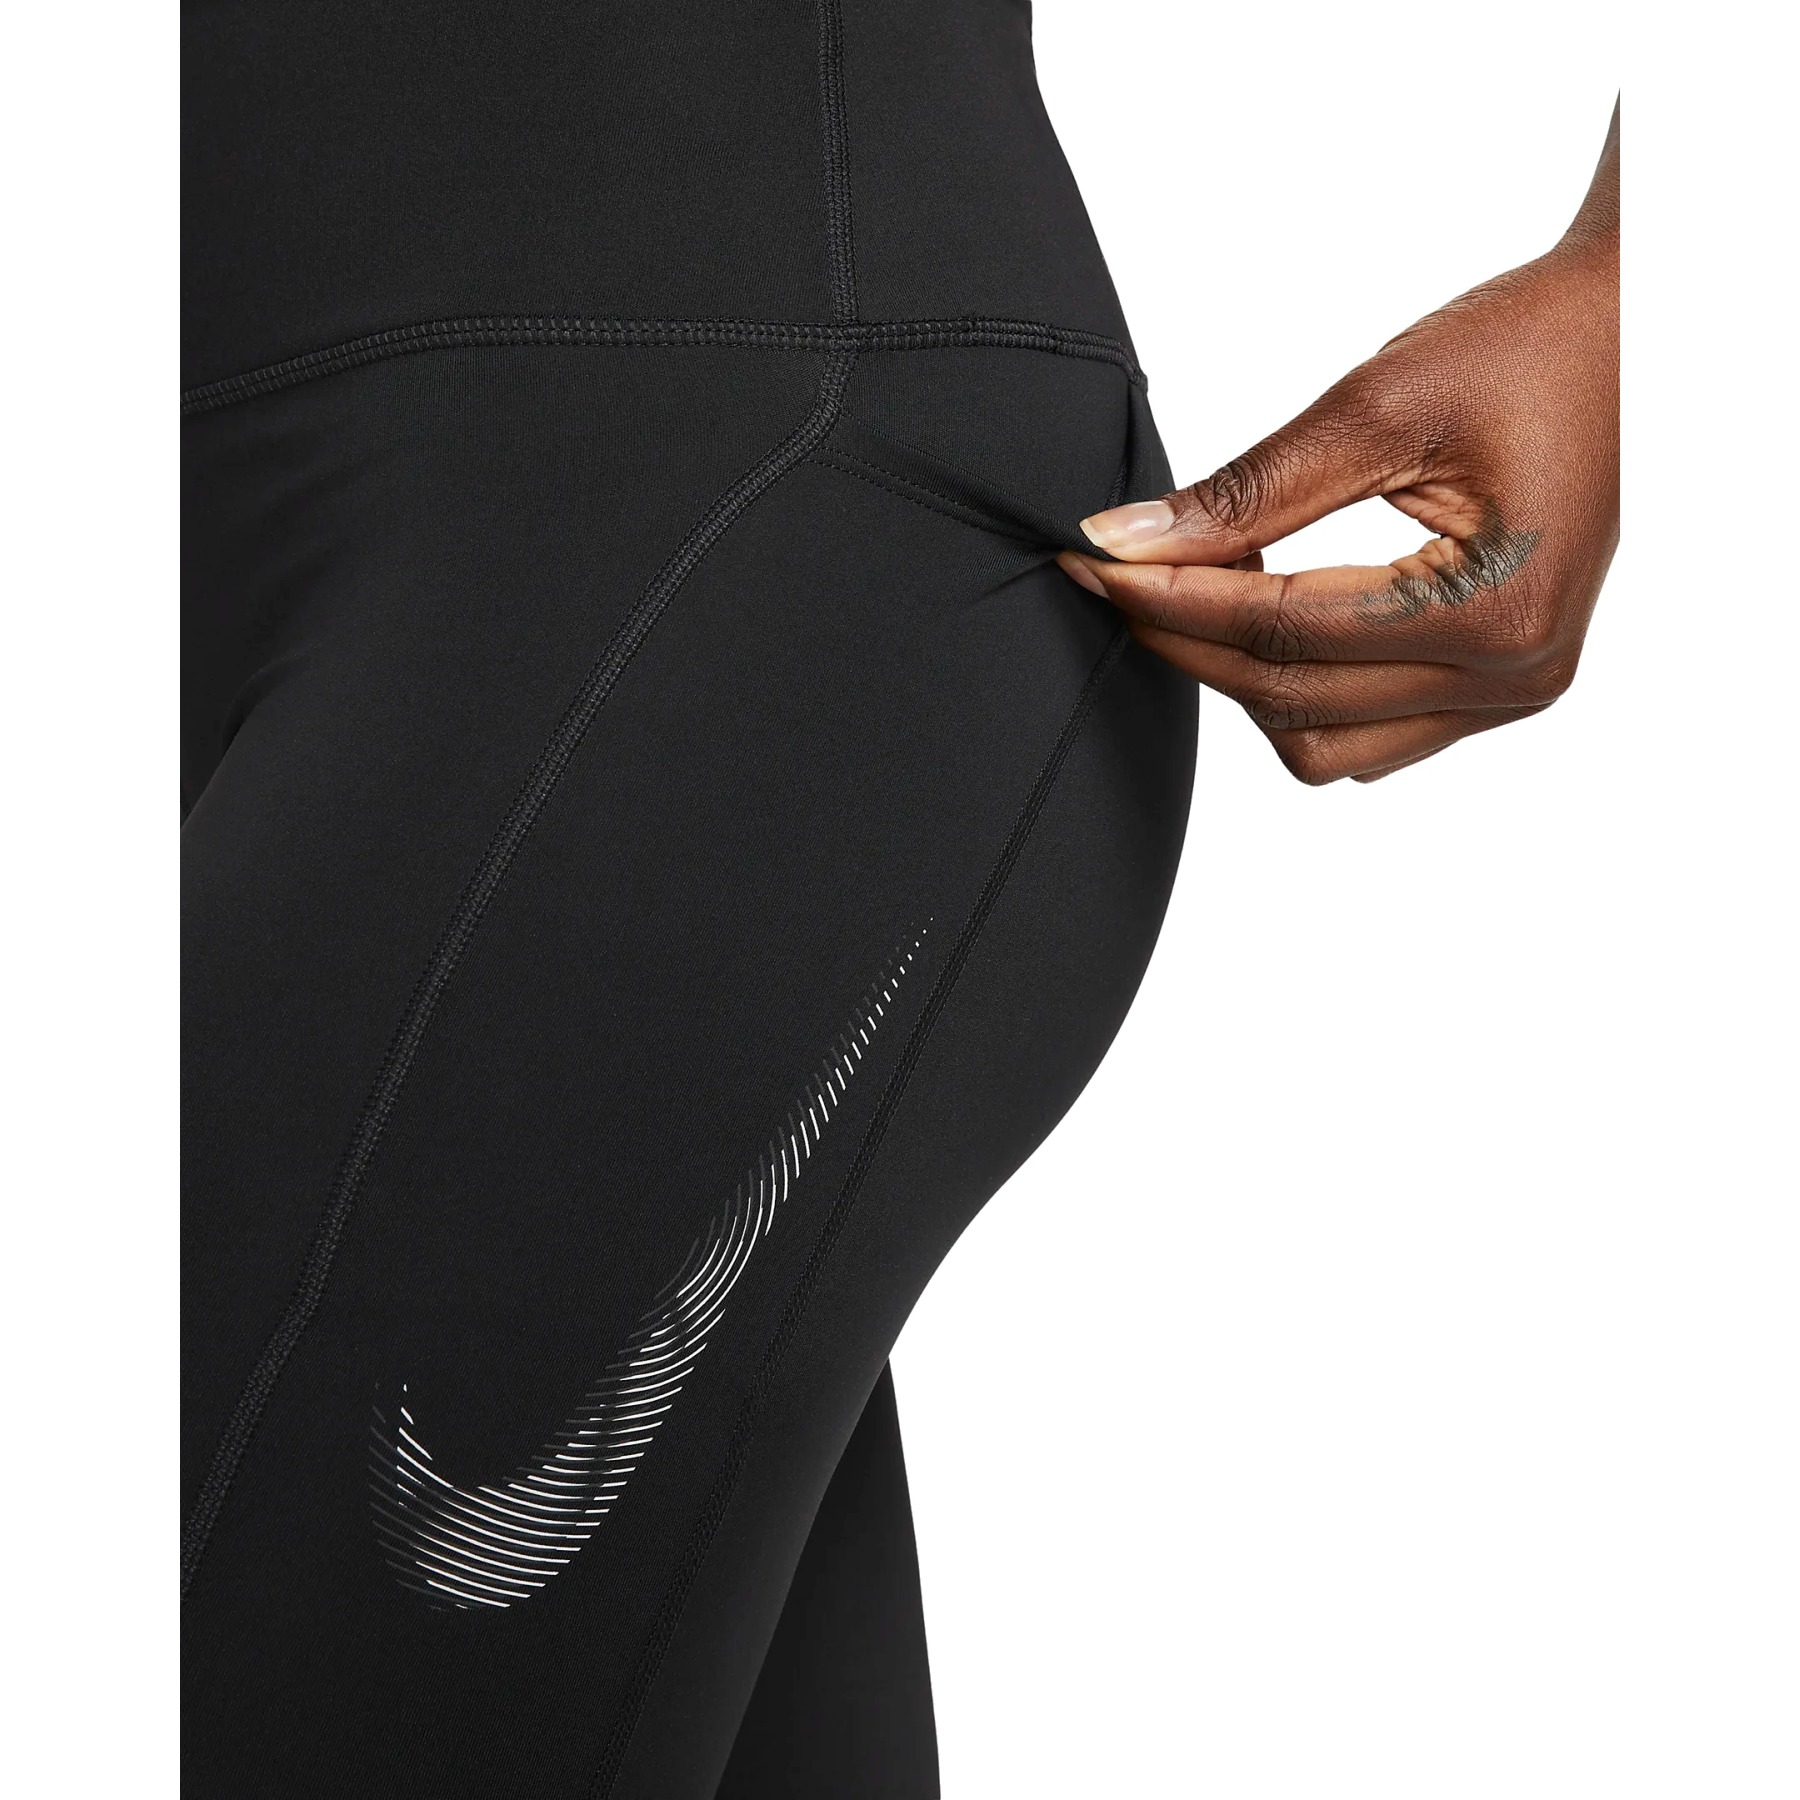 Nike Fast Swoosh Women's Mid-Rise 7/8 Printed Running Leggings with  Pockets. Nike IN